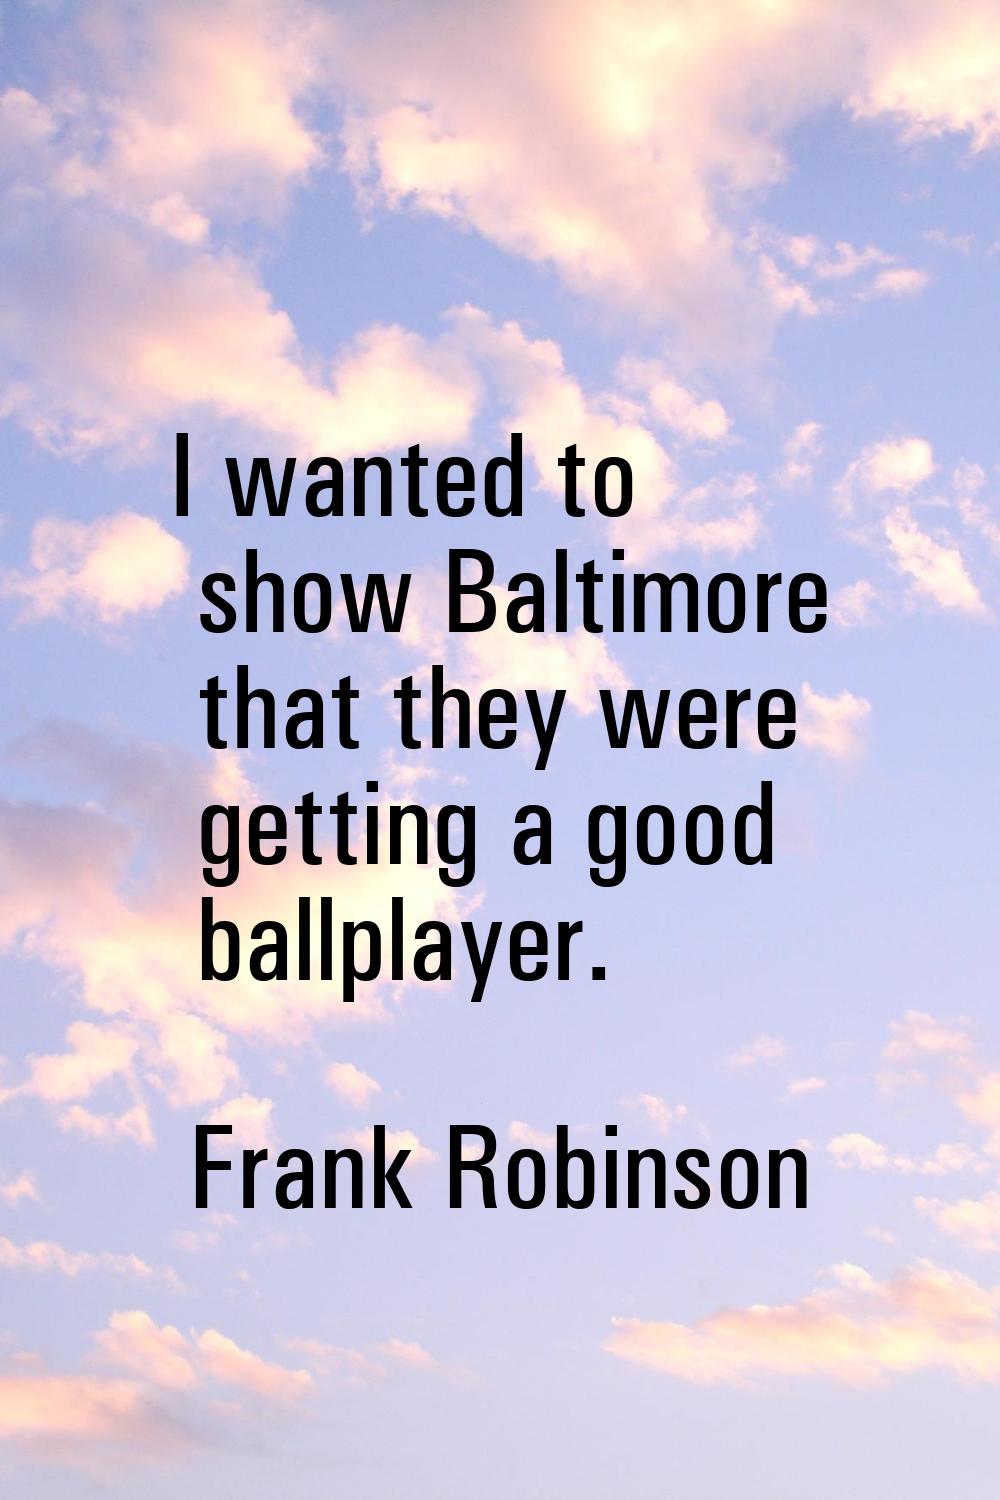 I wanted to show Baltimore that they were getting a good ballplayer.